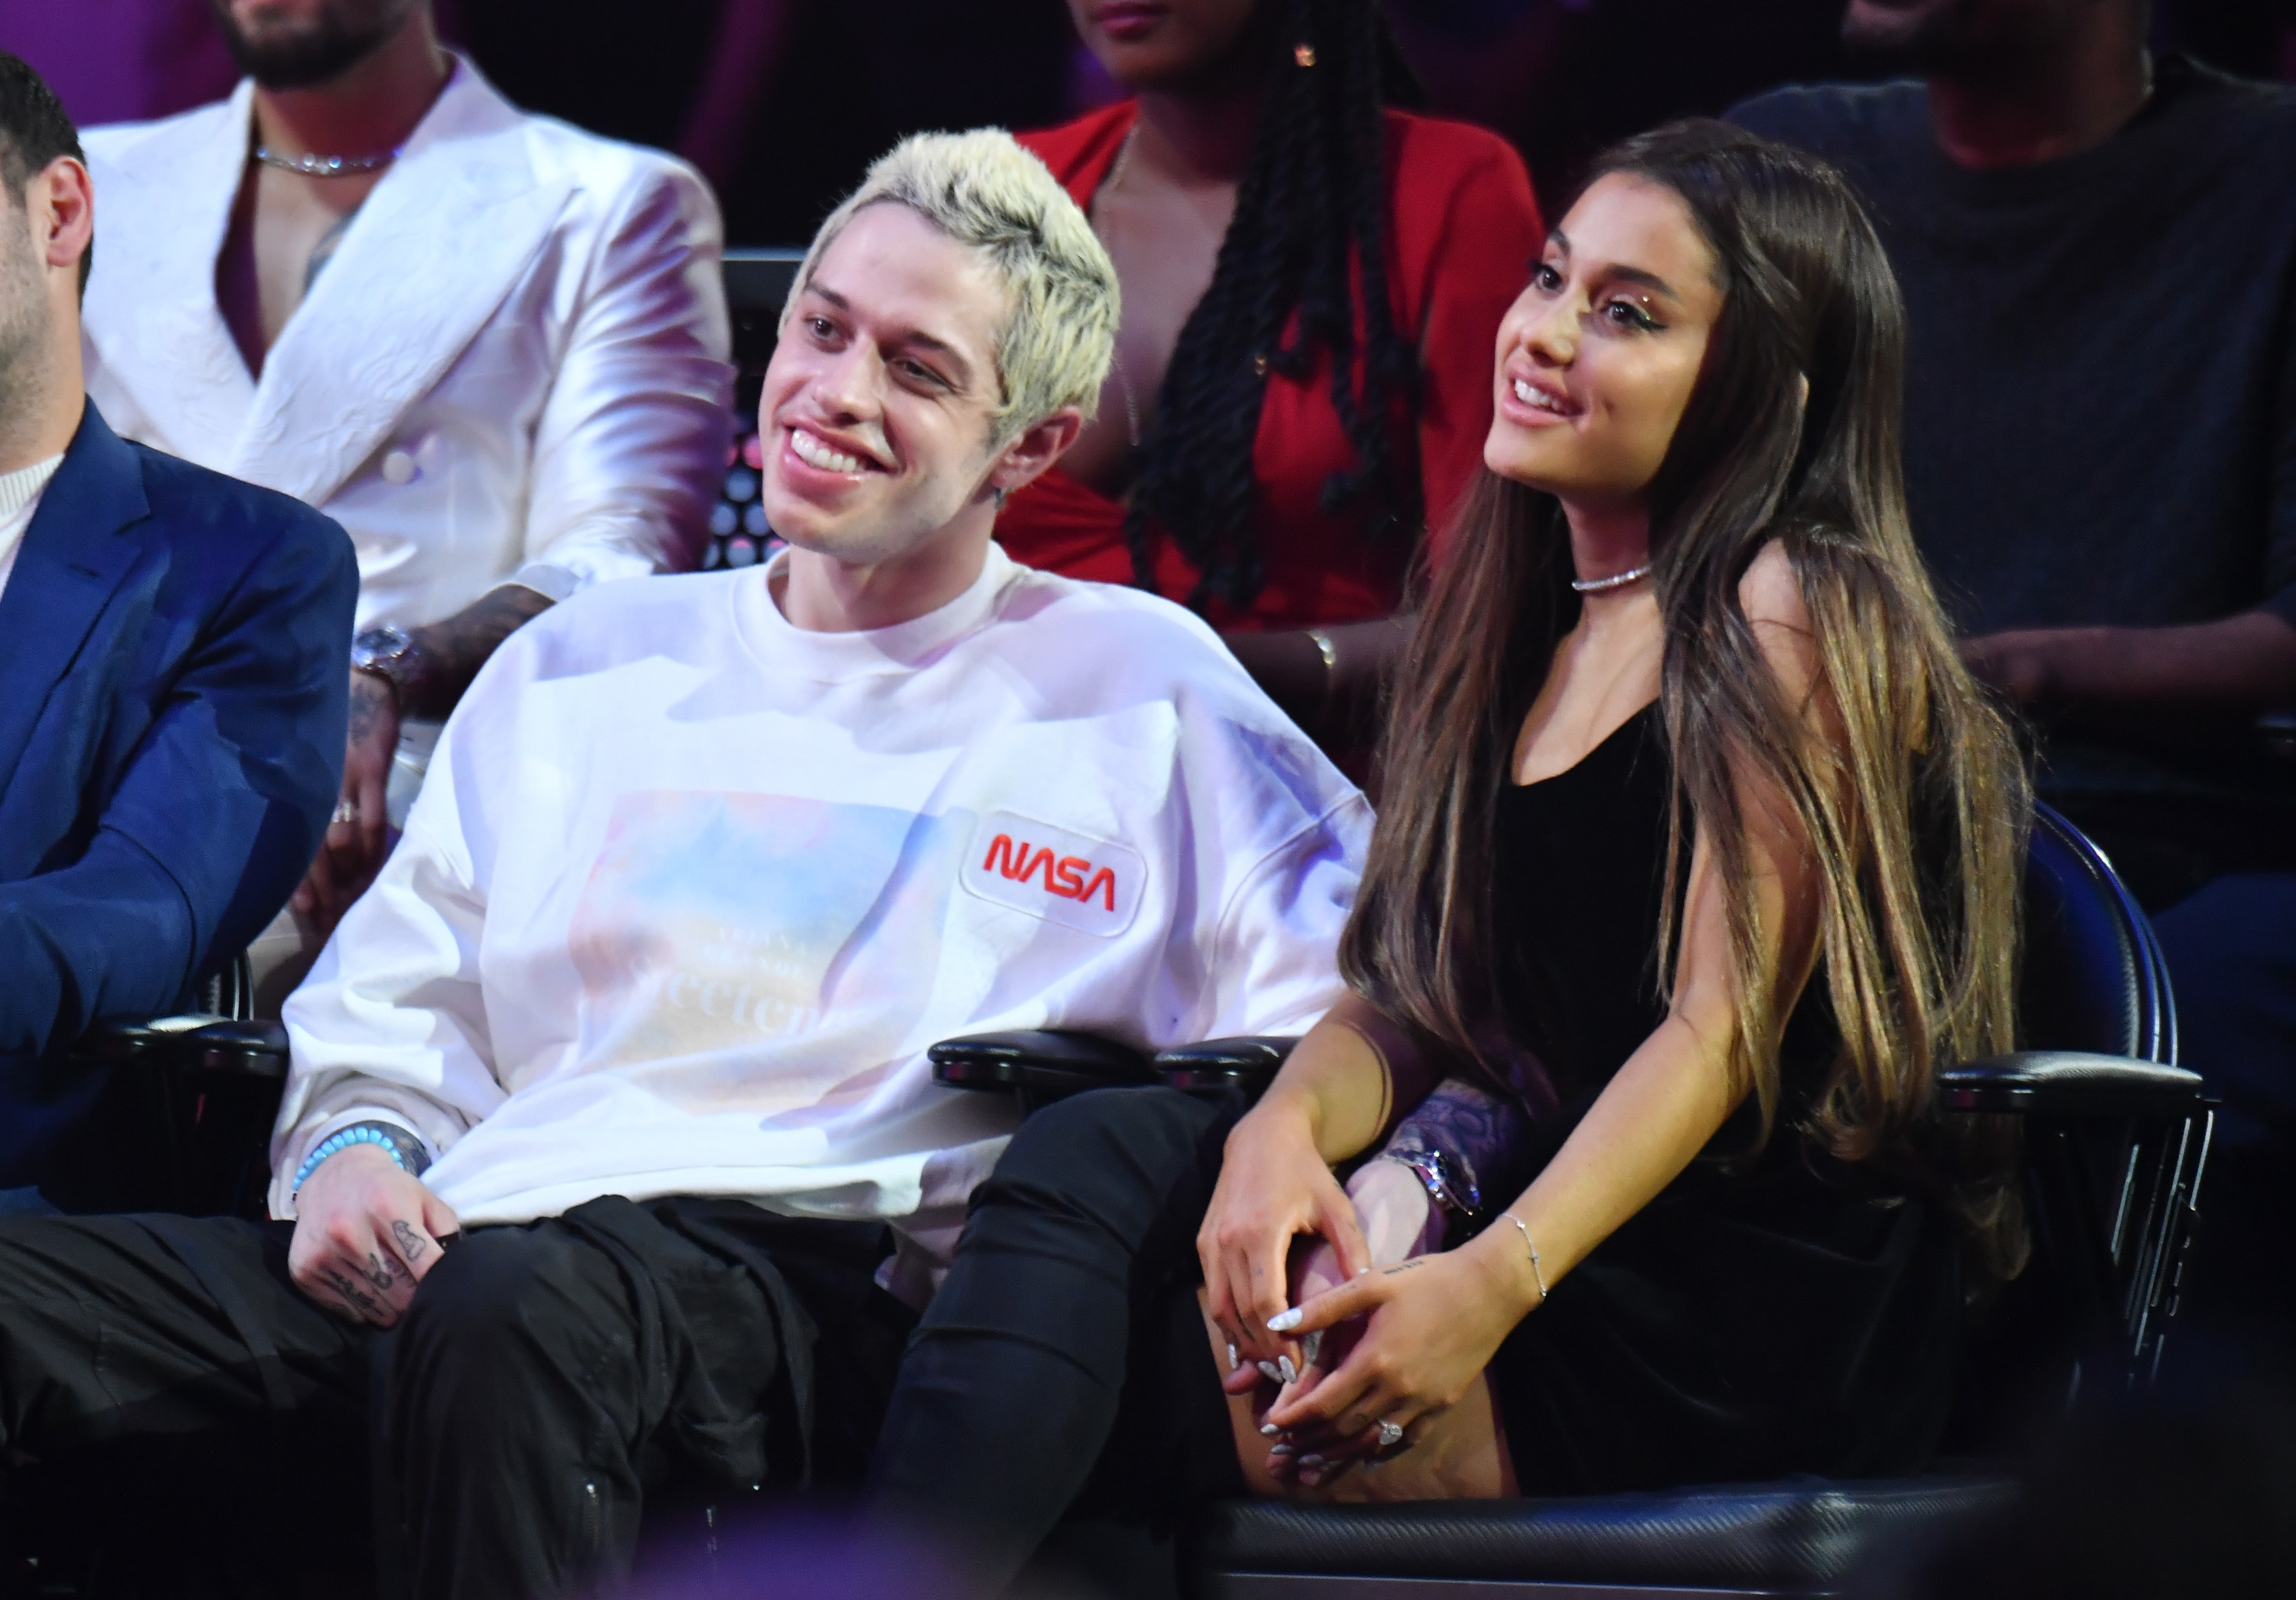 Pete Davidson and Ariana Grande sit side by side